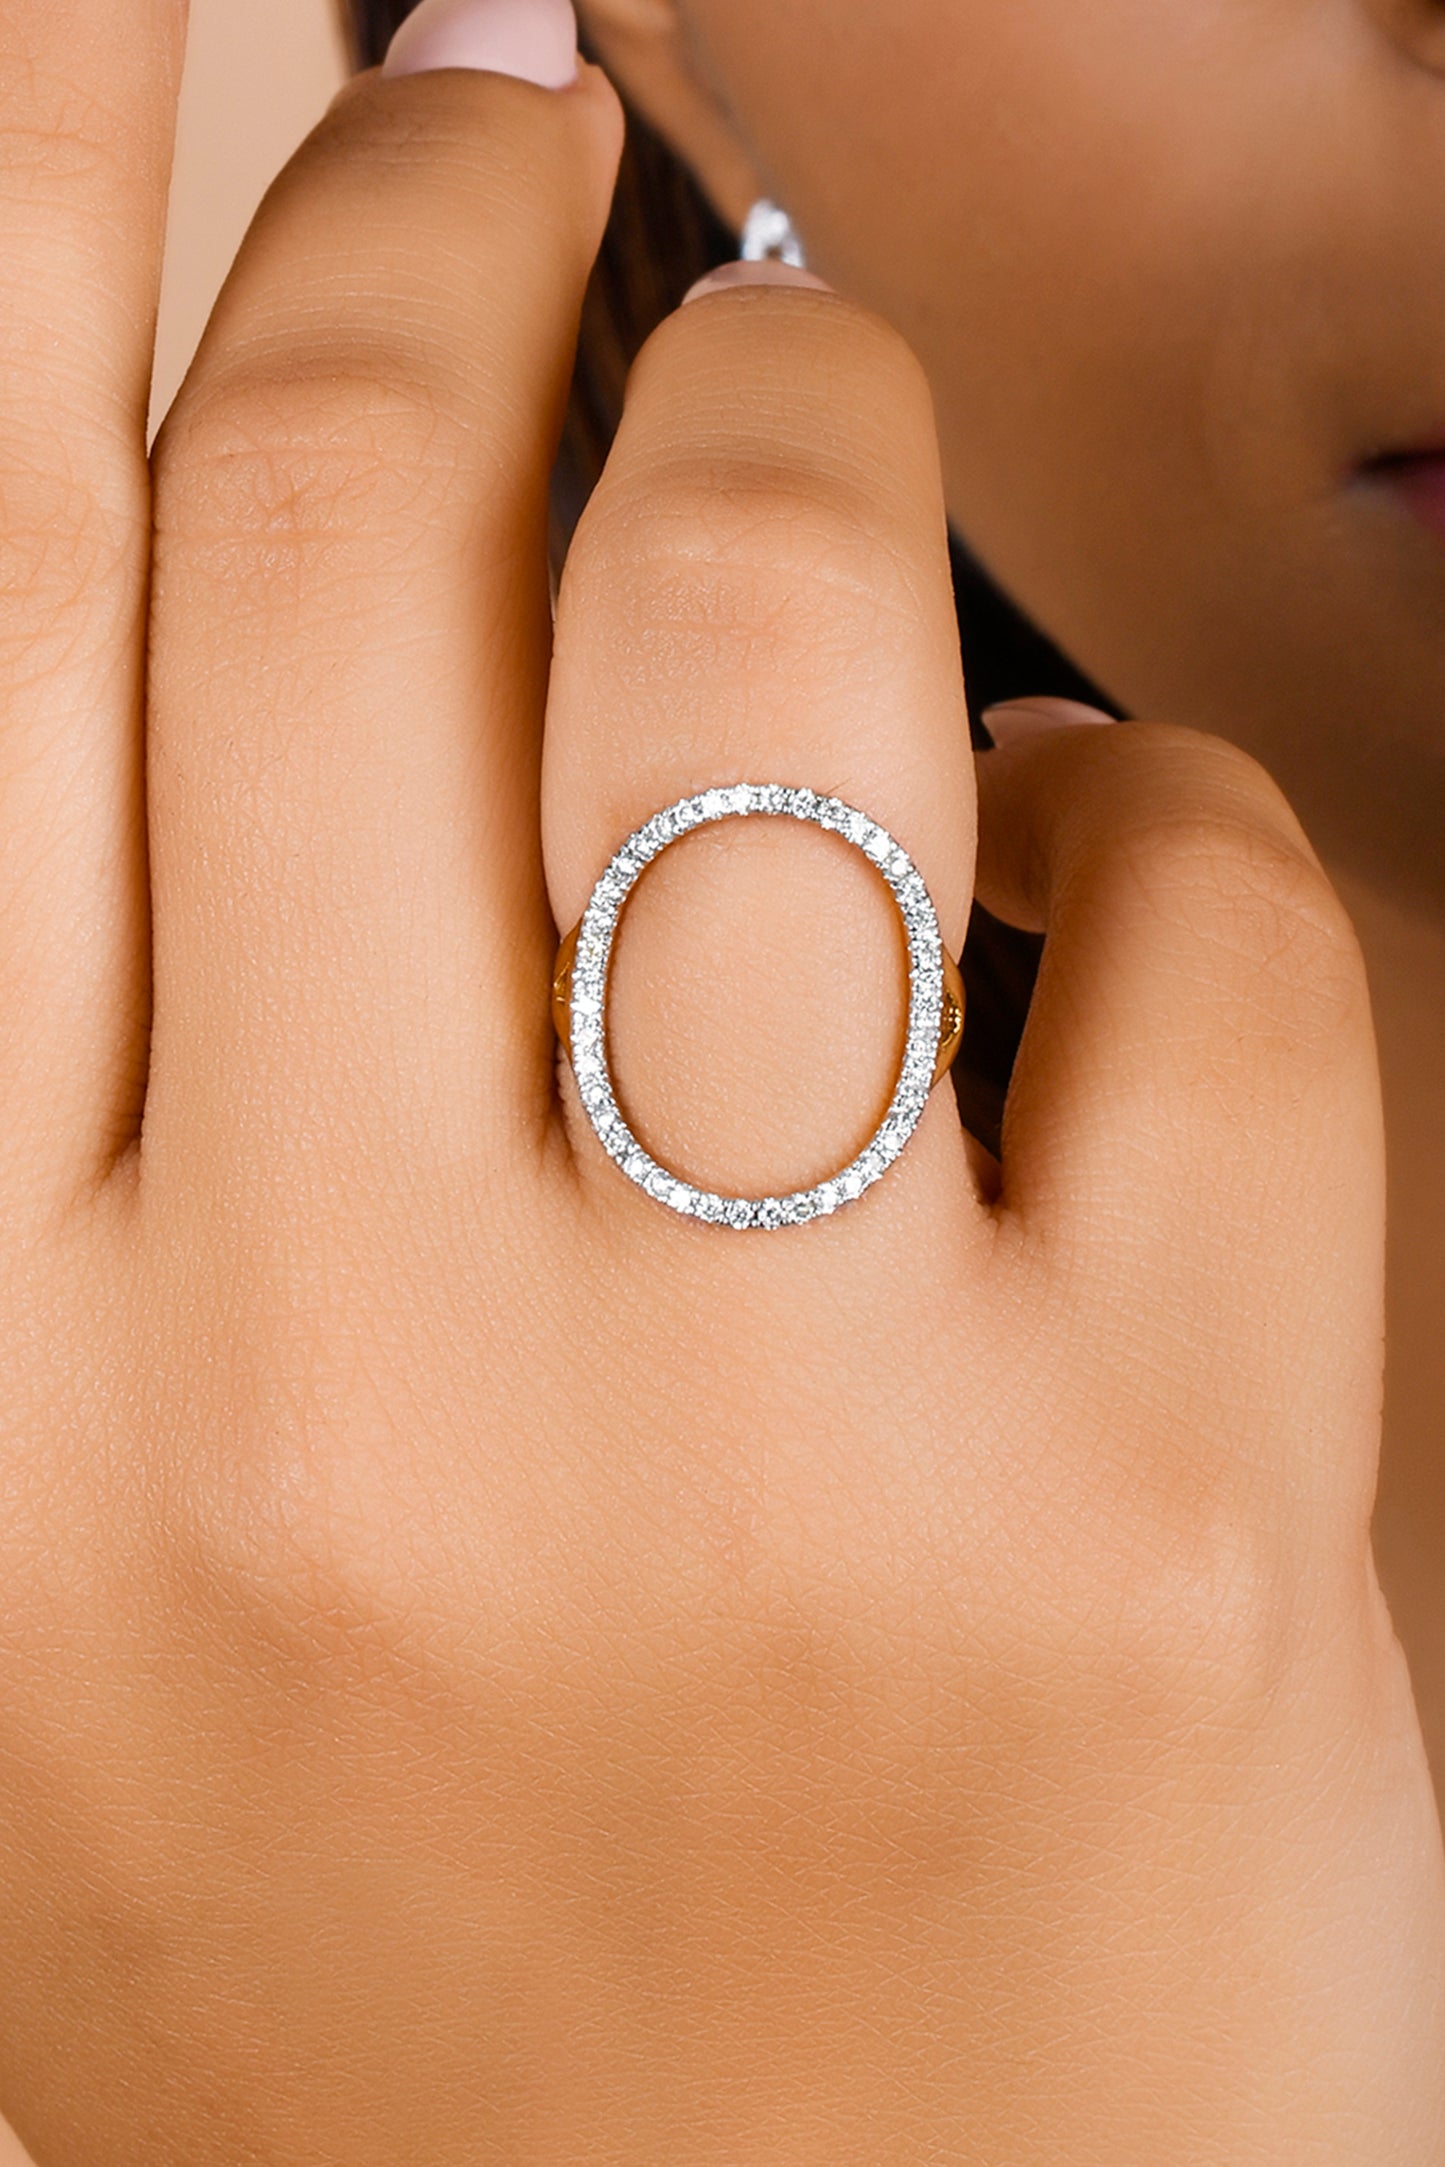 The Oval Ring